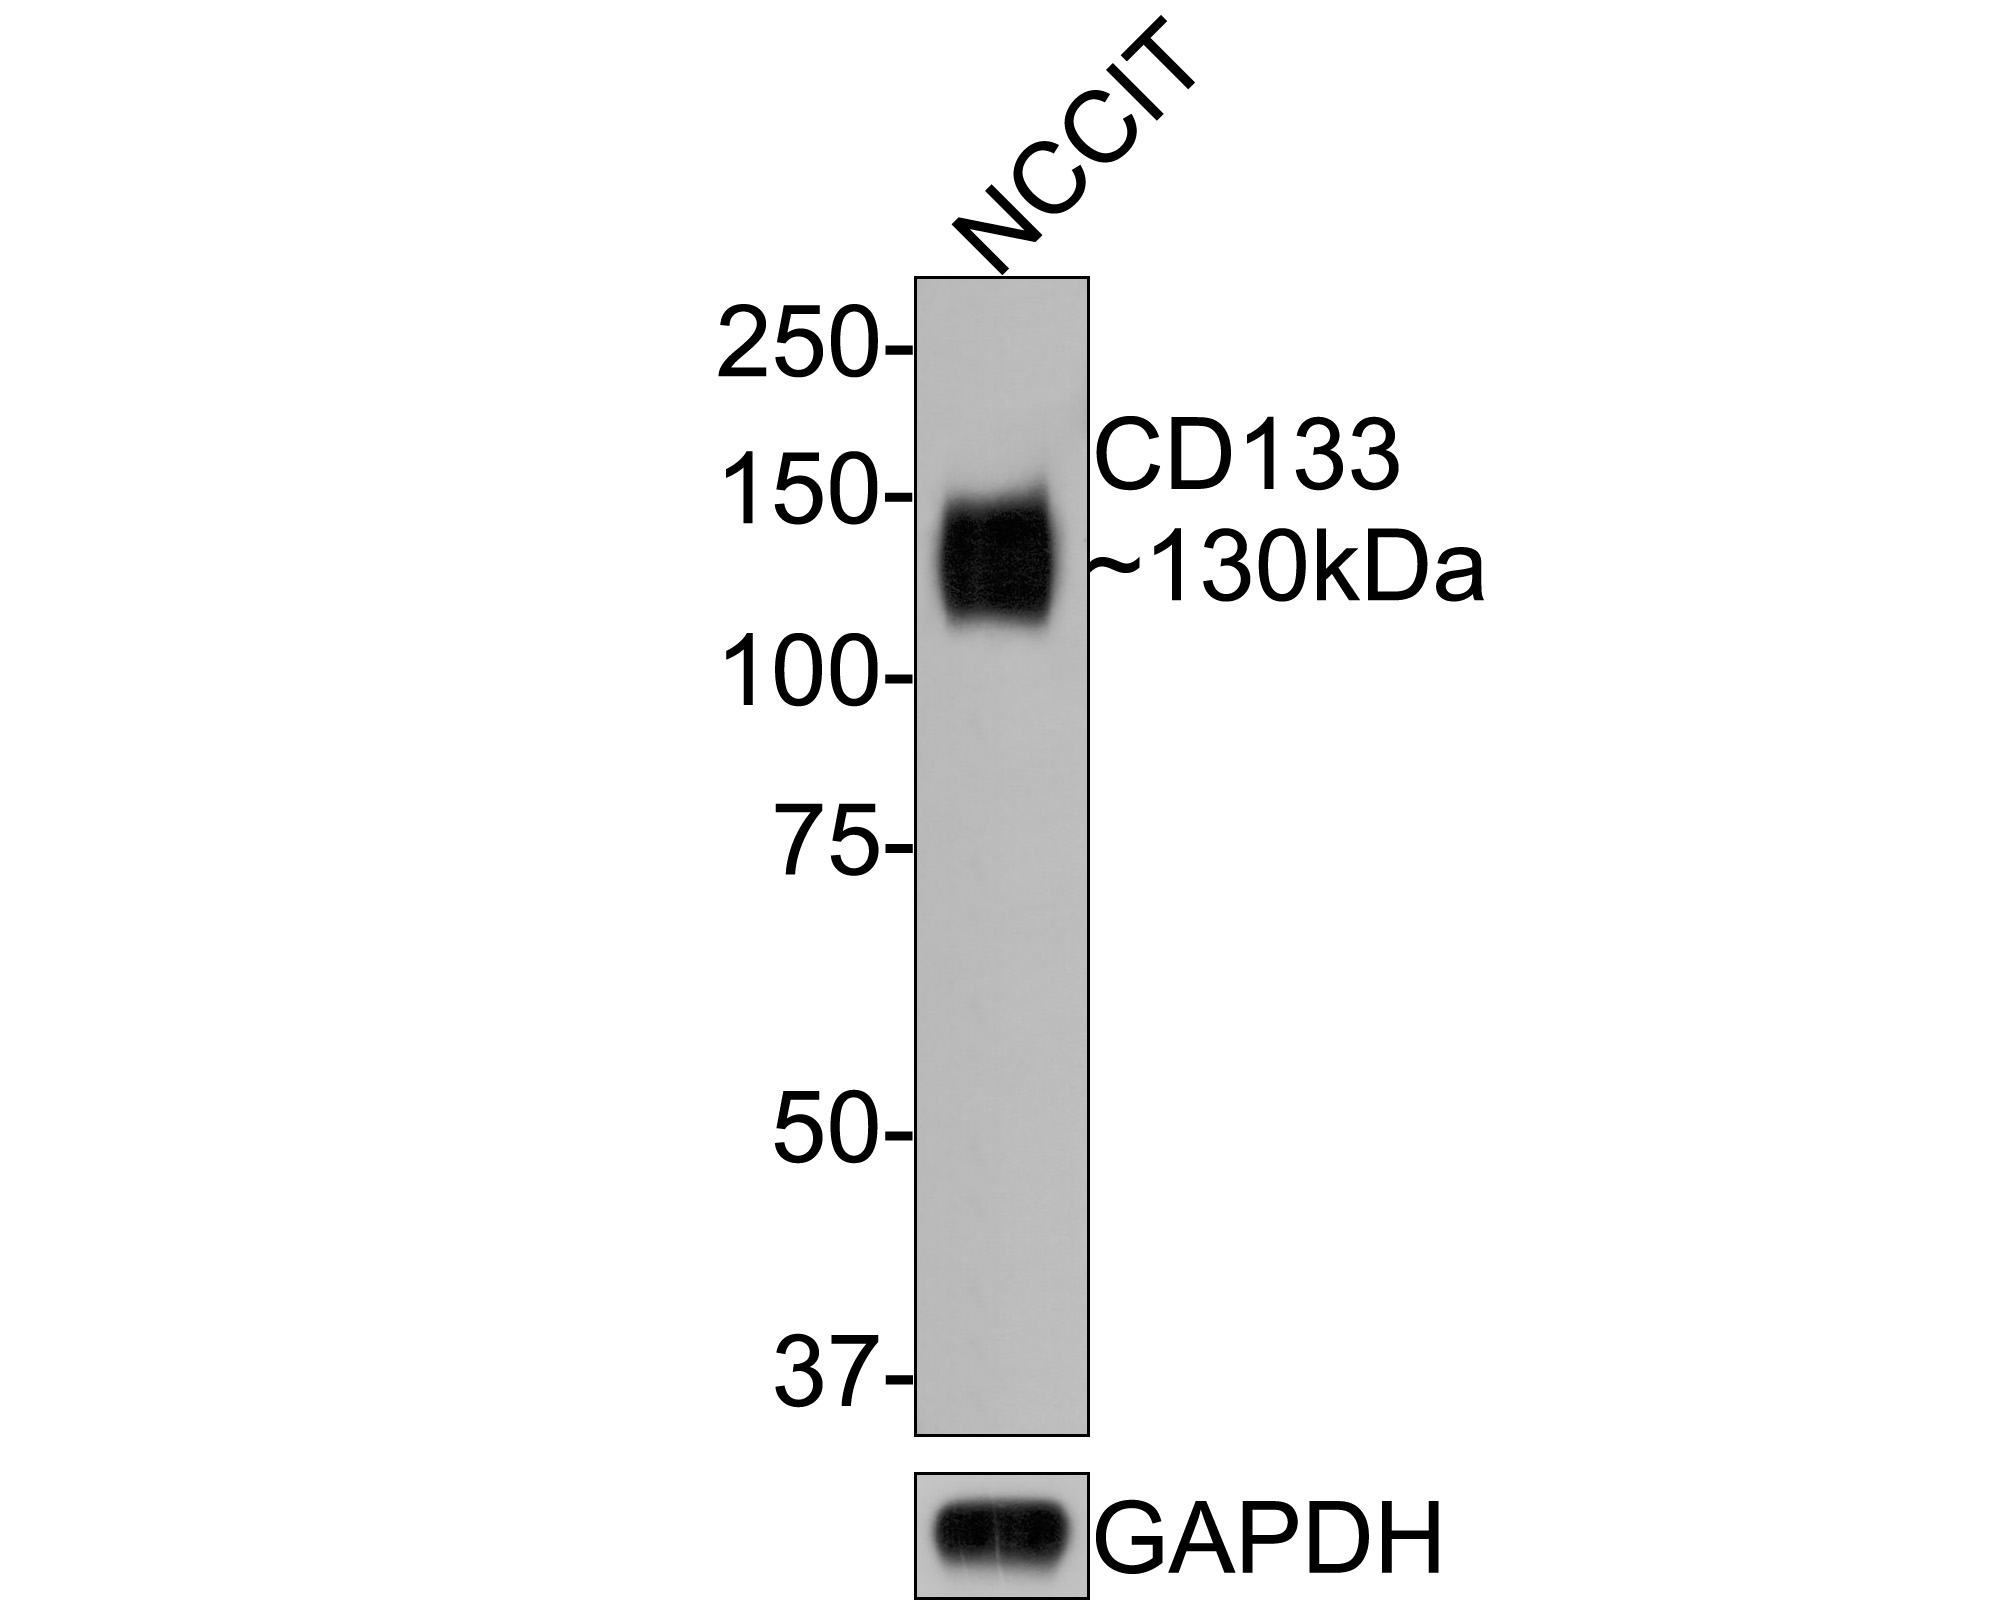 Western blot analysis of CD133 on NCCIT cell lysates with Mouse anti-CD133 antibody (HA601024) at 1/500 dilution.<br />
<br />
Lysates/proteins at 10 µg/Lane.<br />
<br />
Predicted band size: 97 kDa<br />
Observed band size: 130 kDa<br />
<br />
Exposure time: 2 minutes;<br />
<br />
8% SDS-PAGE gel.<br />
<br />
Proteins were transferred to a PVDF membrane and blocked with 5% NFDM/TBST for 1 hour at room temperature. The primary antibody (HA601024) at 1/500 dilution was used in 5% NFDM/TBST at room temperature for 2 hours. Goat Anti-Mouse IgG - HRP Secondary Antibody (HA1006) at 1:100,000 dilution was used for 1 hour at room temperature.